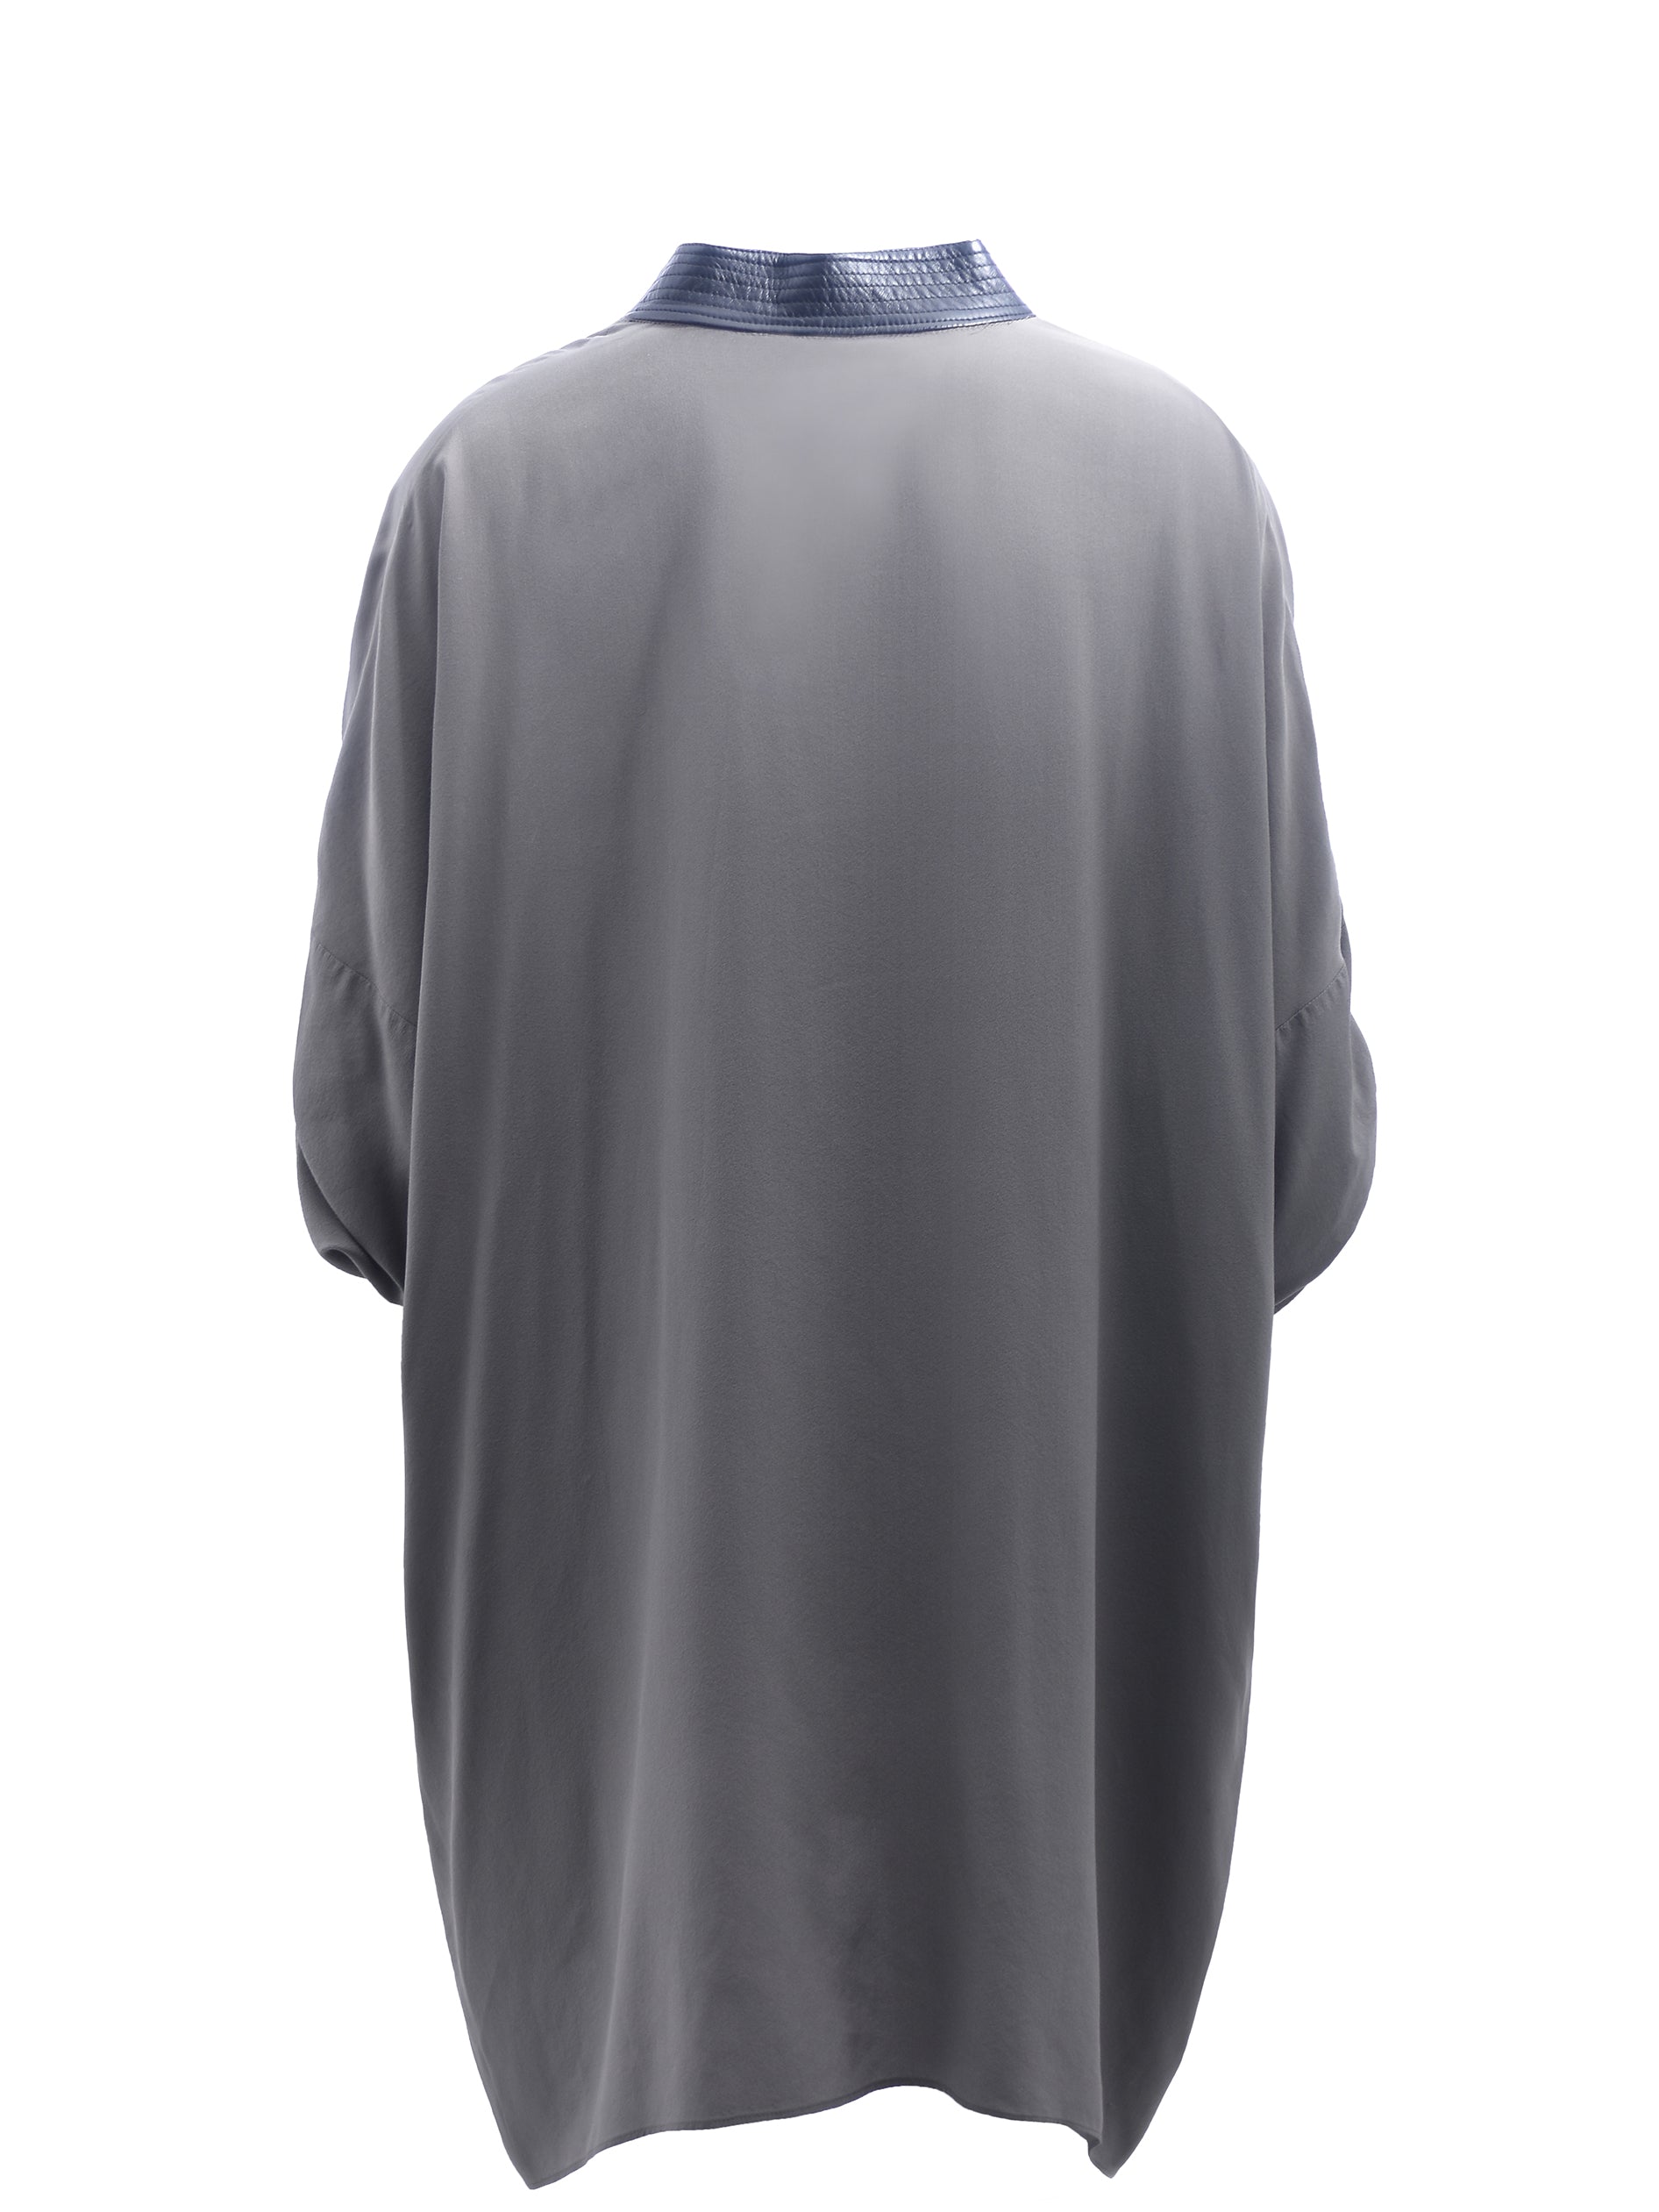 GREY AND BLACK SILK OVERSIZED TOP